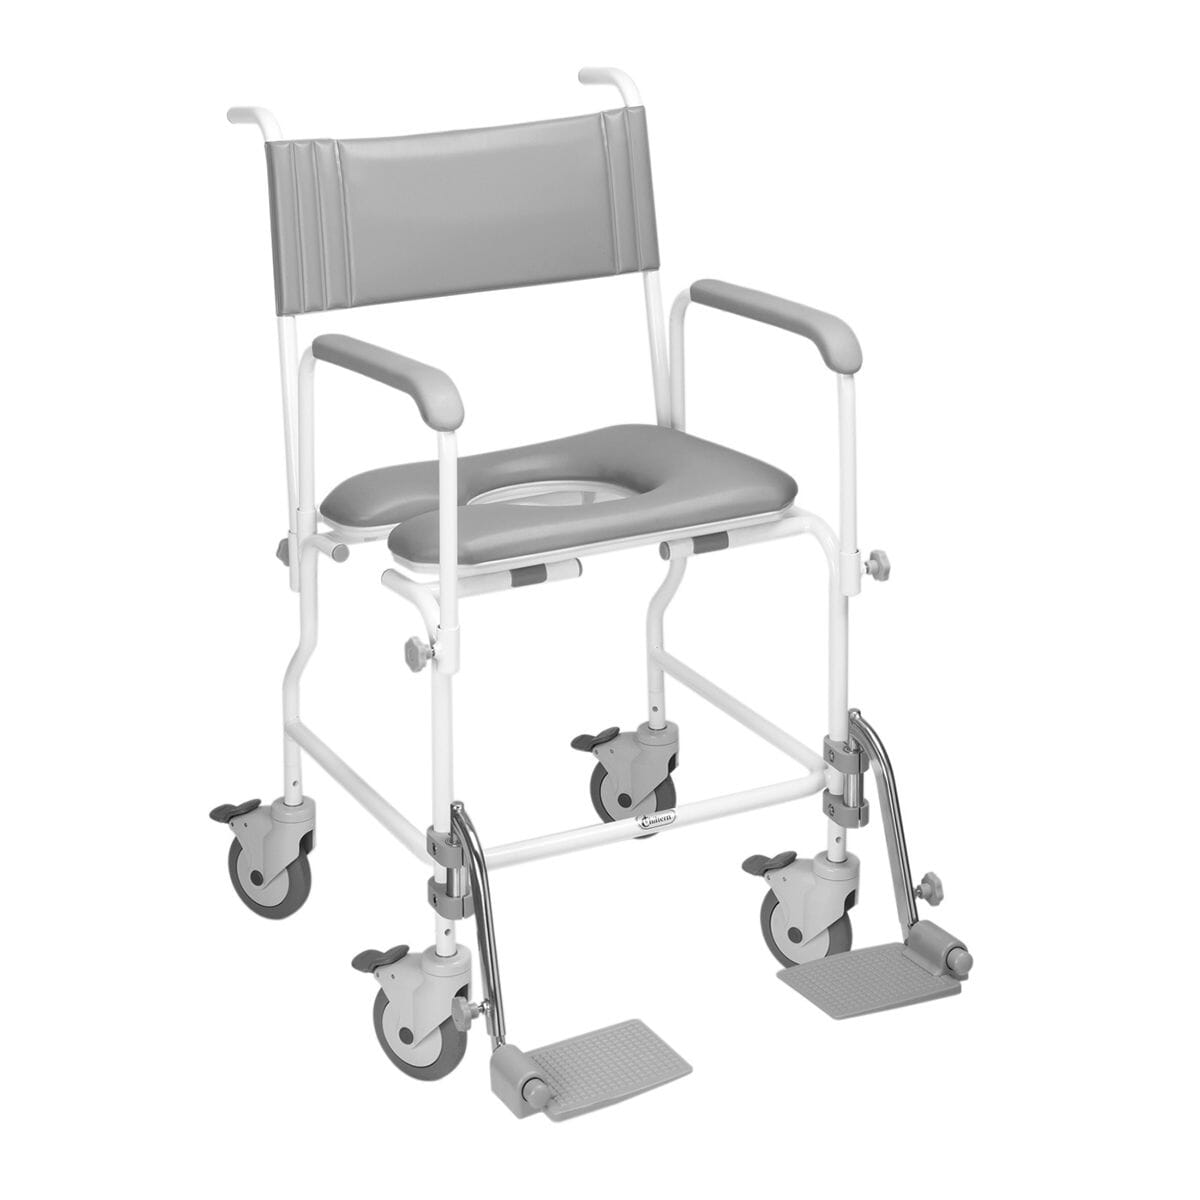 View Aquamaster A06 Attendant Propelled Shower Commode Chair Seat Width 445 17 information